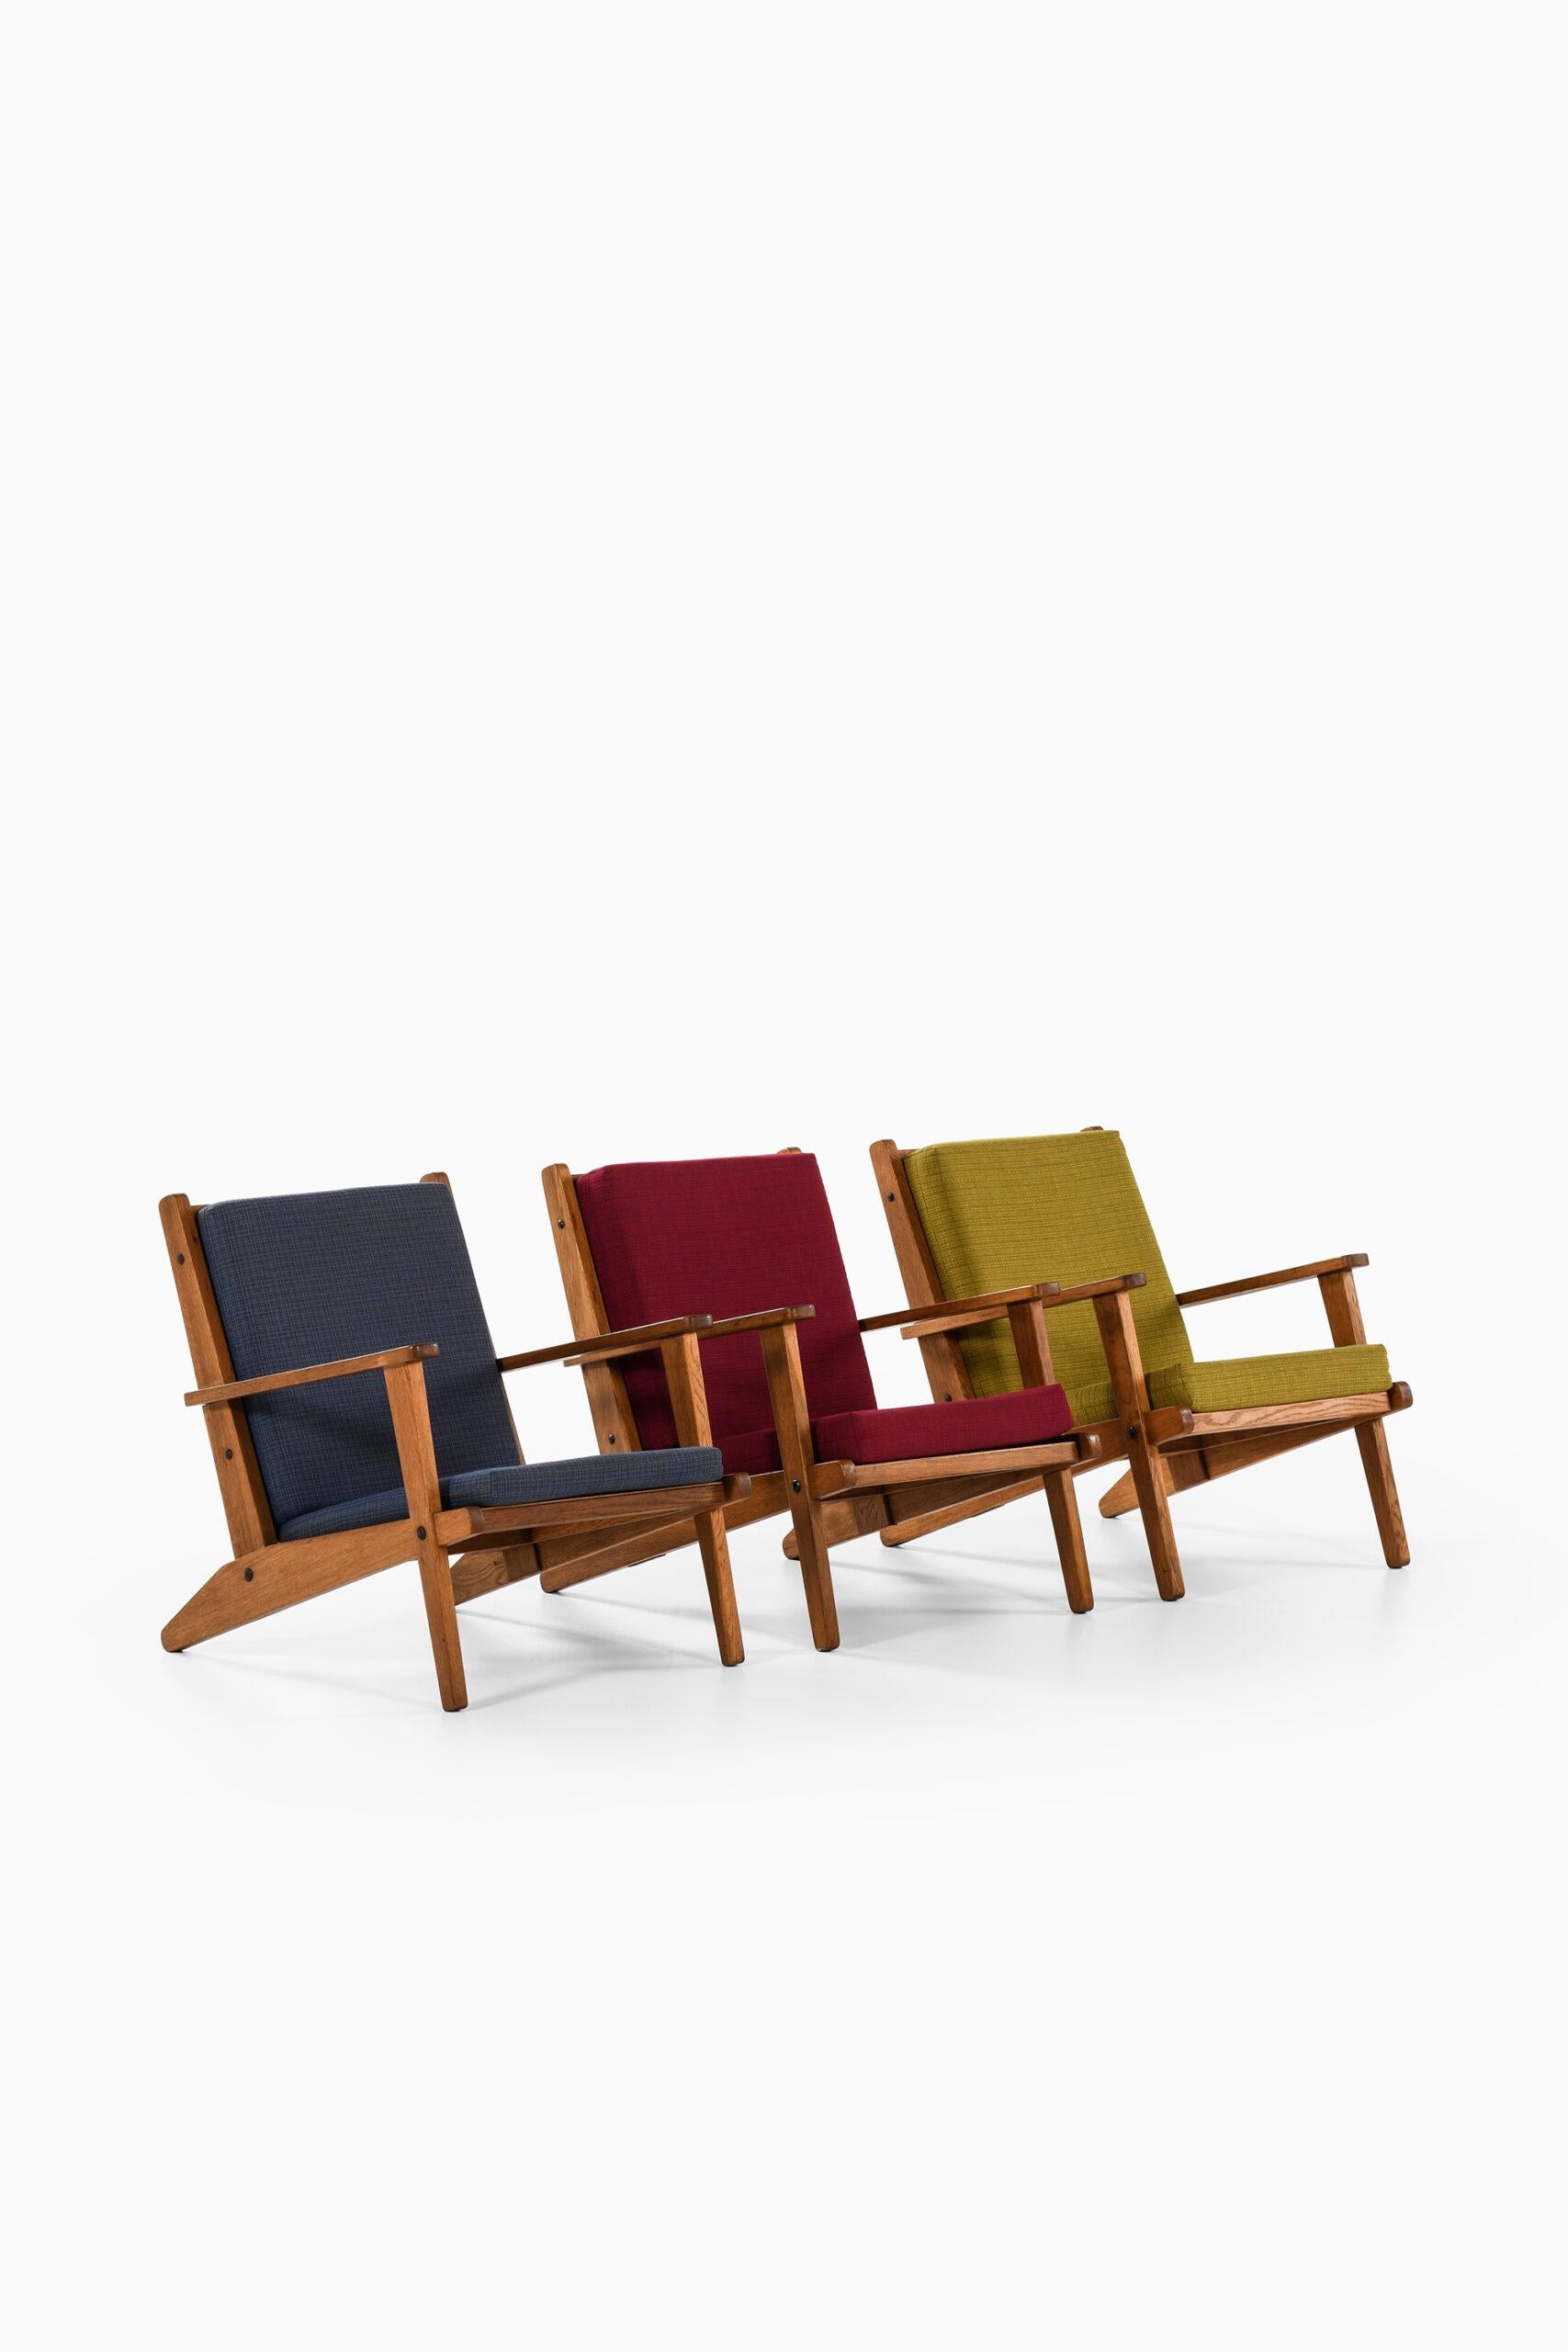 3 rare easy chairs designed by Poul Hansen. Produced in Denmark.